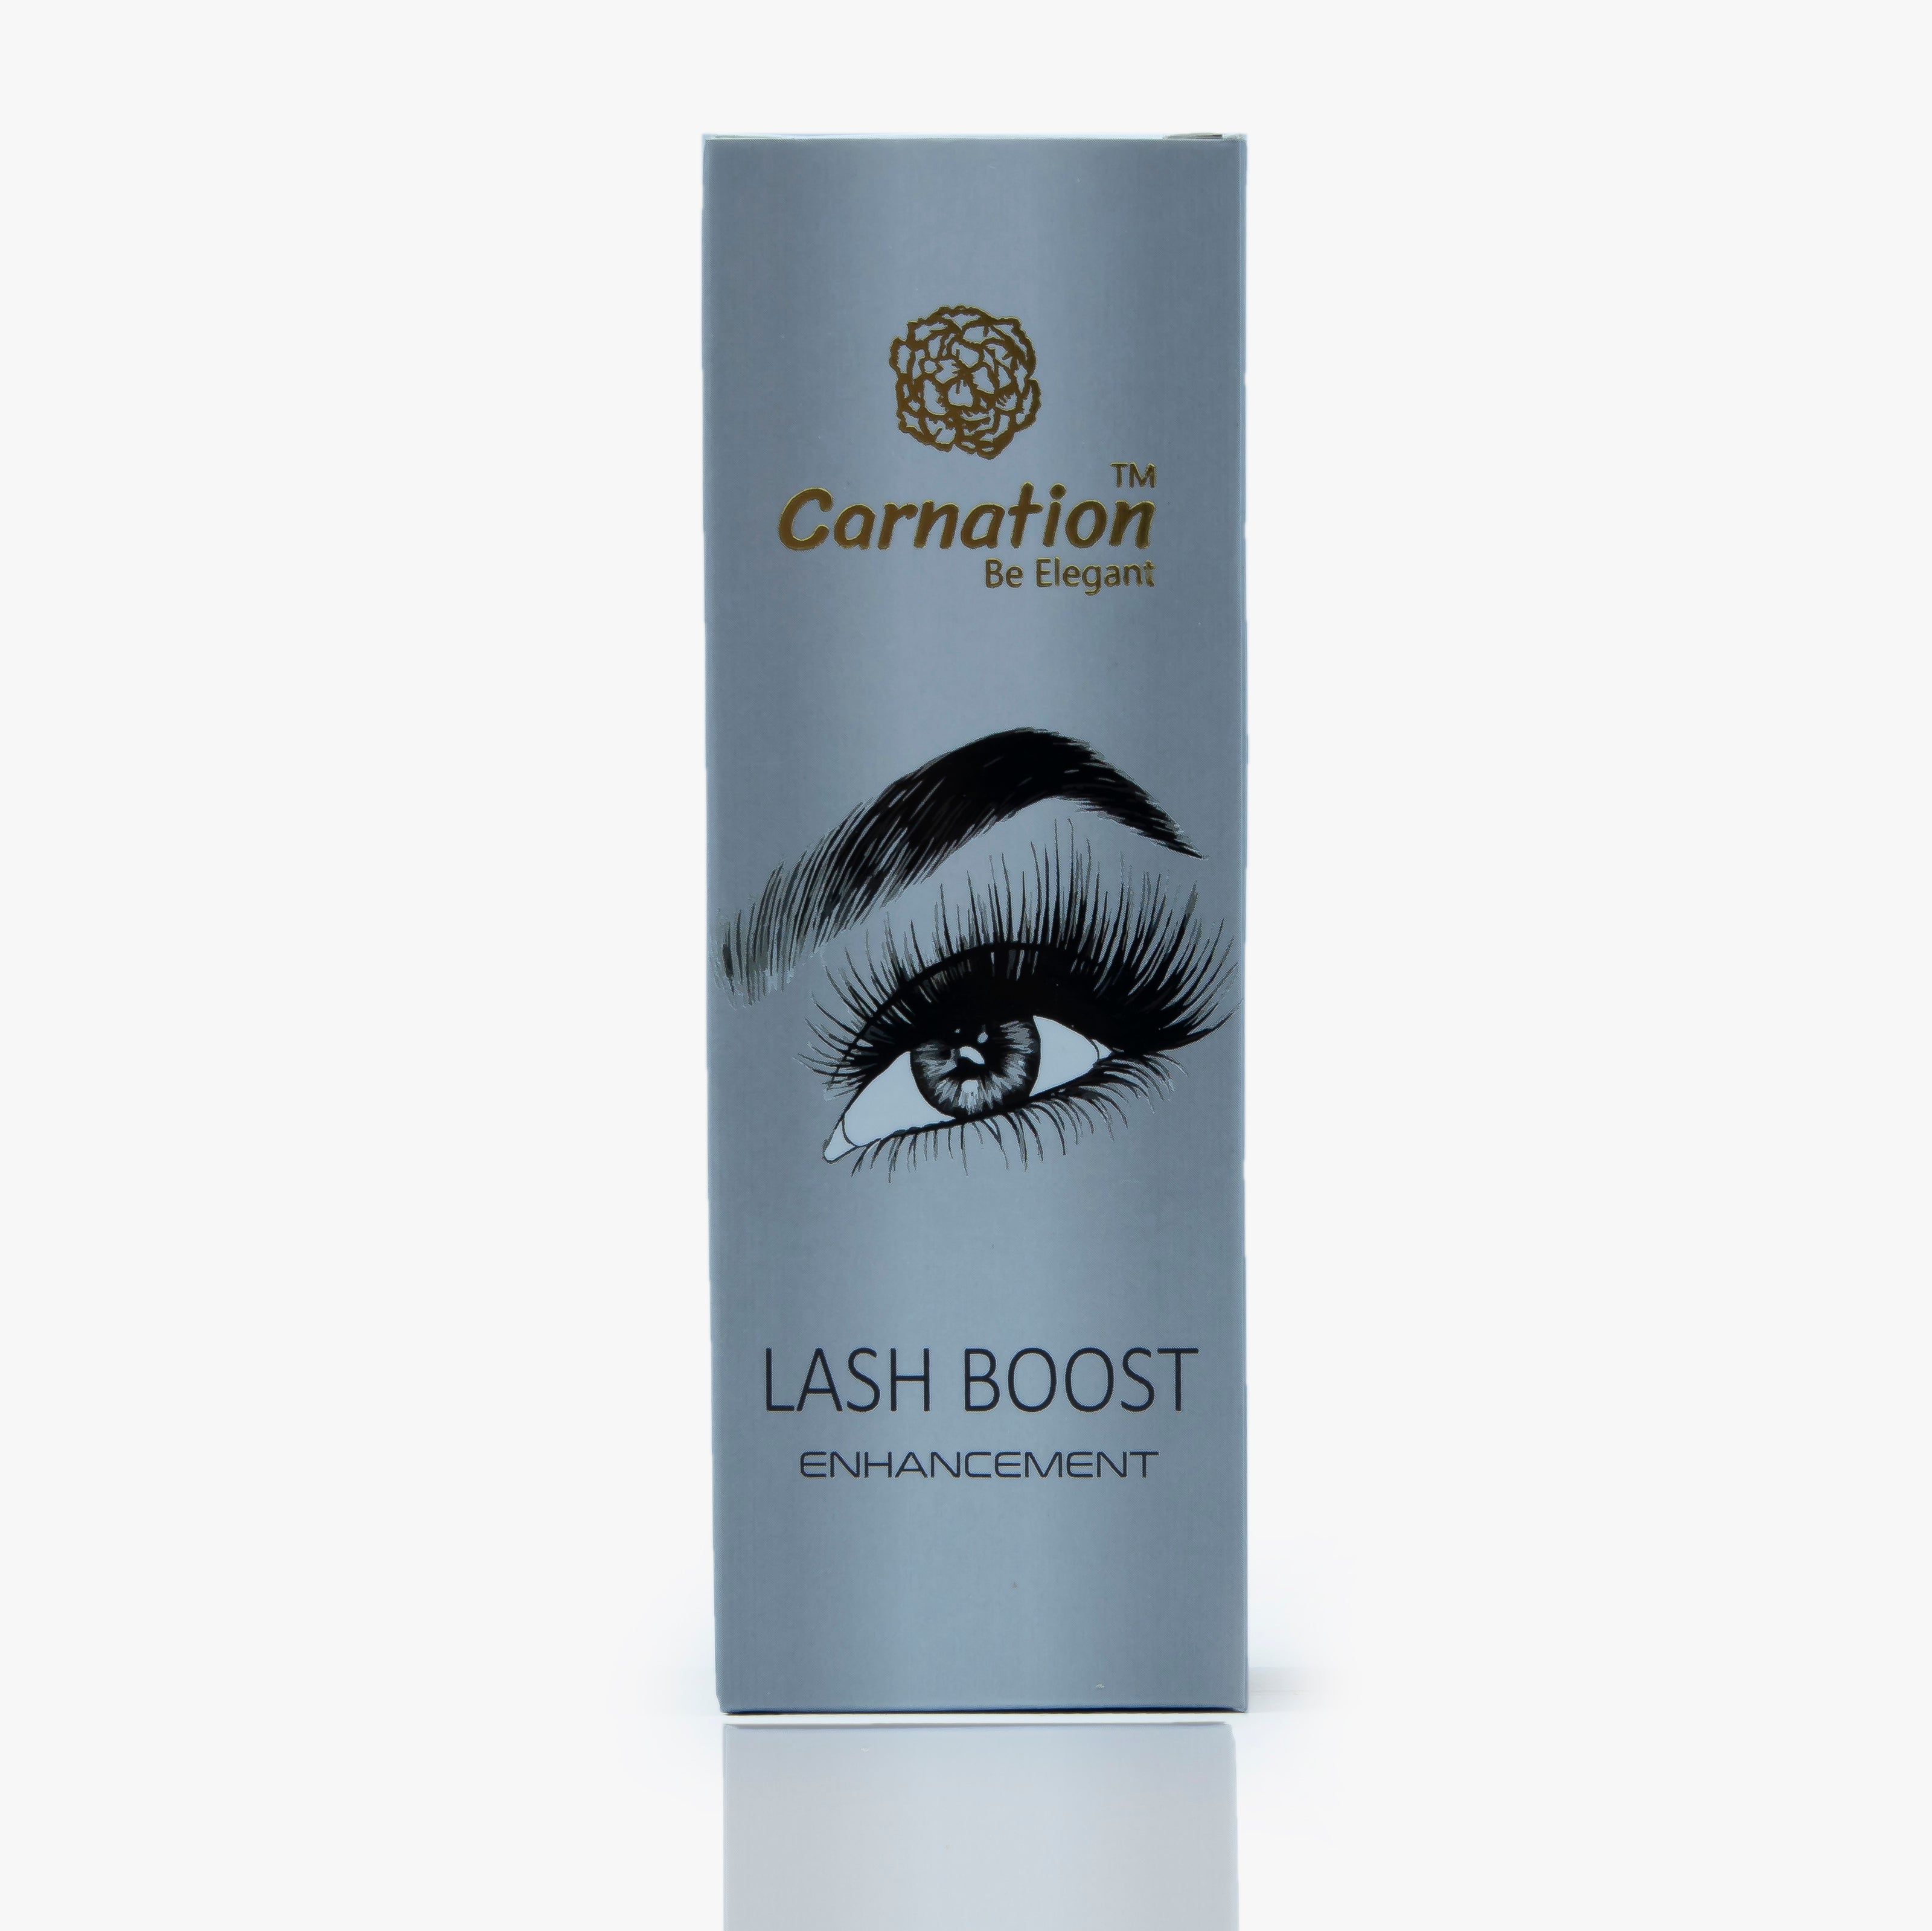 LASH BOOST Enhancement - Long and thick Lashes and Eye Brows